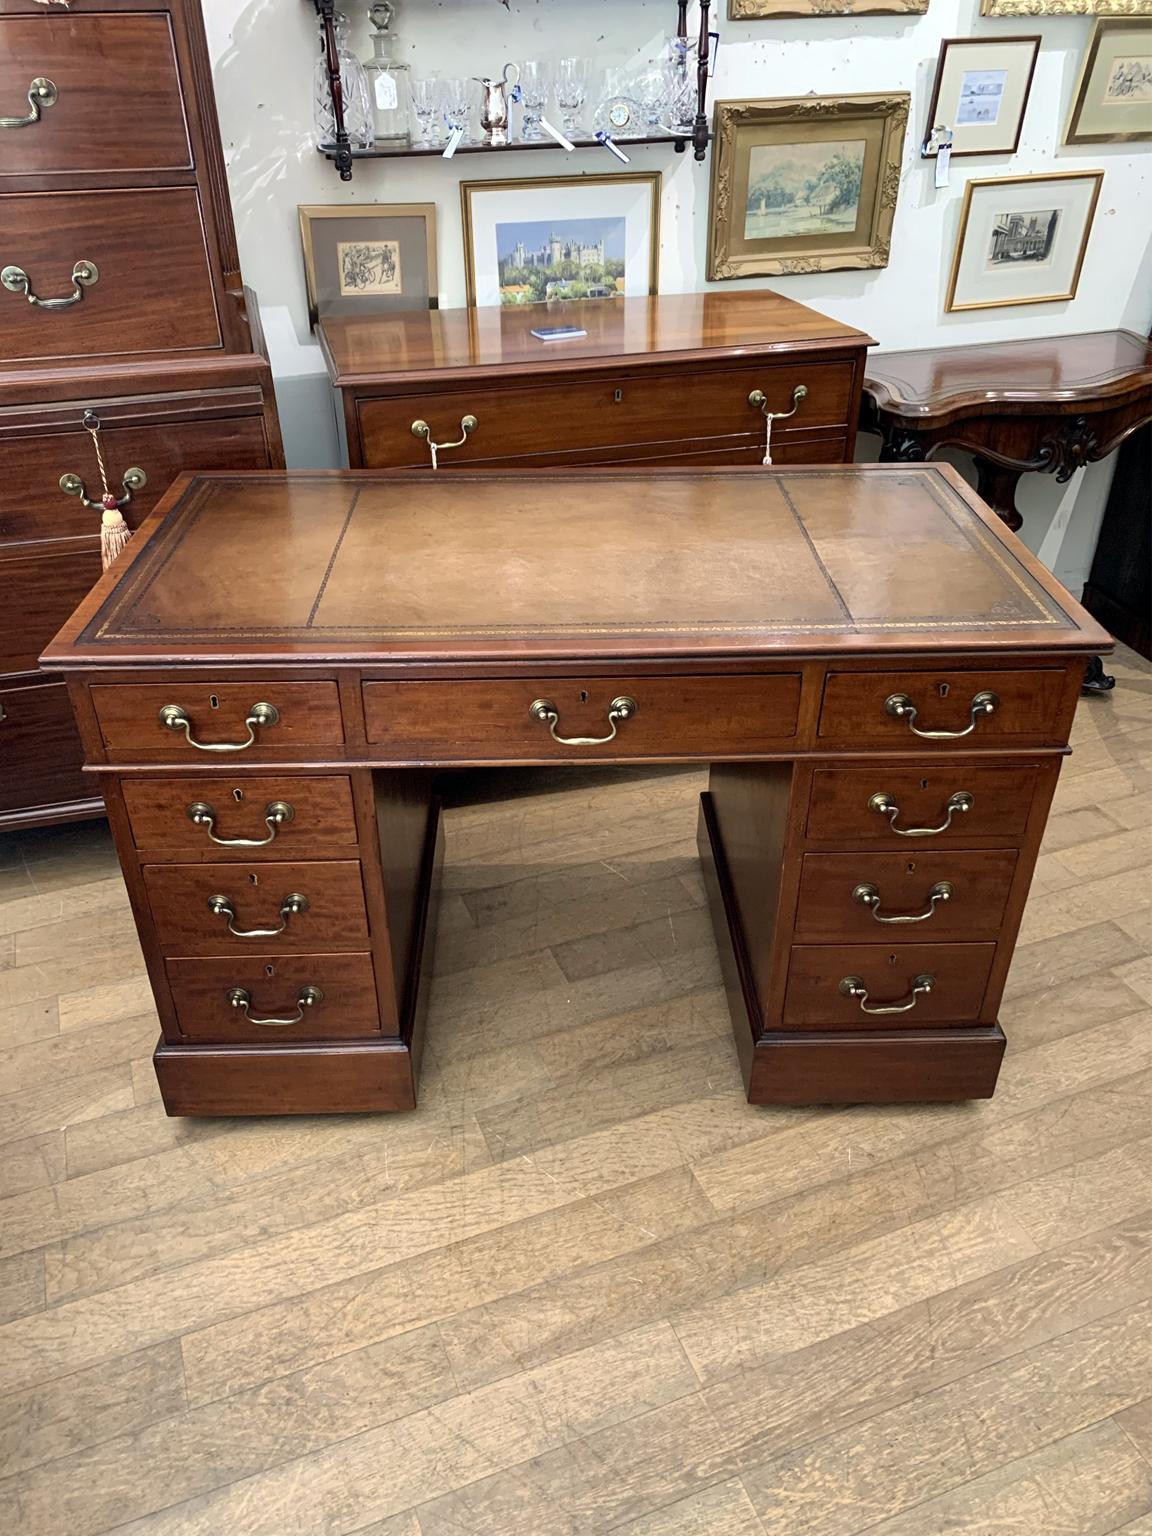 19th century Mahogany pedestal desk, the top with a leather writing surface and nine drawers, all with fitted with brass swan neck handles and oak lined drawers. Comes apart in three separate sections with working key.
   